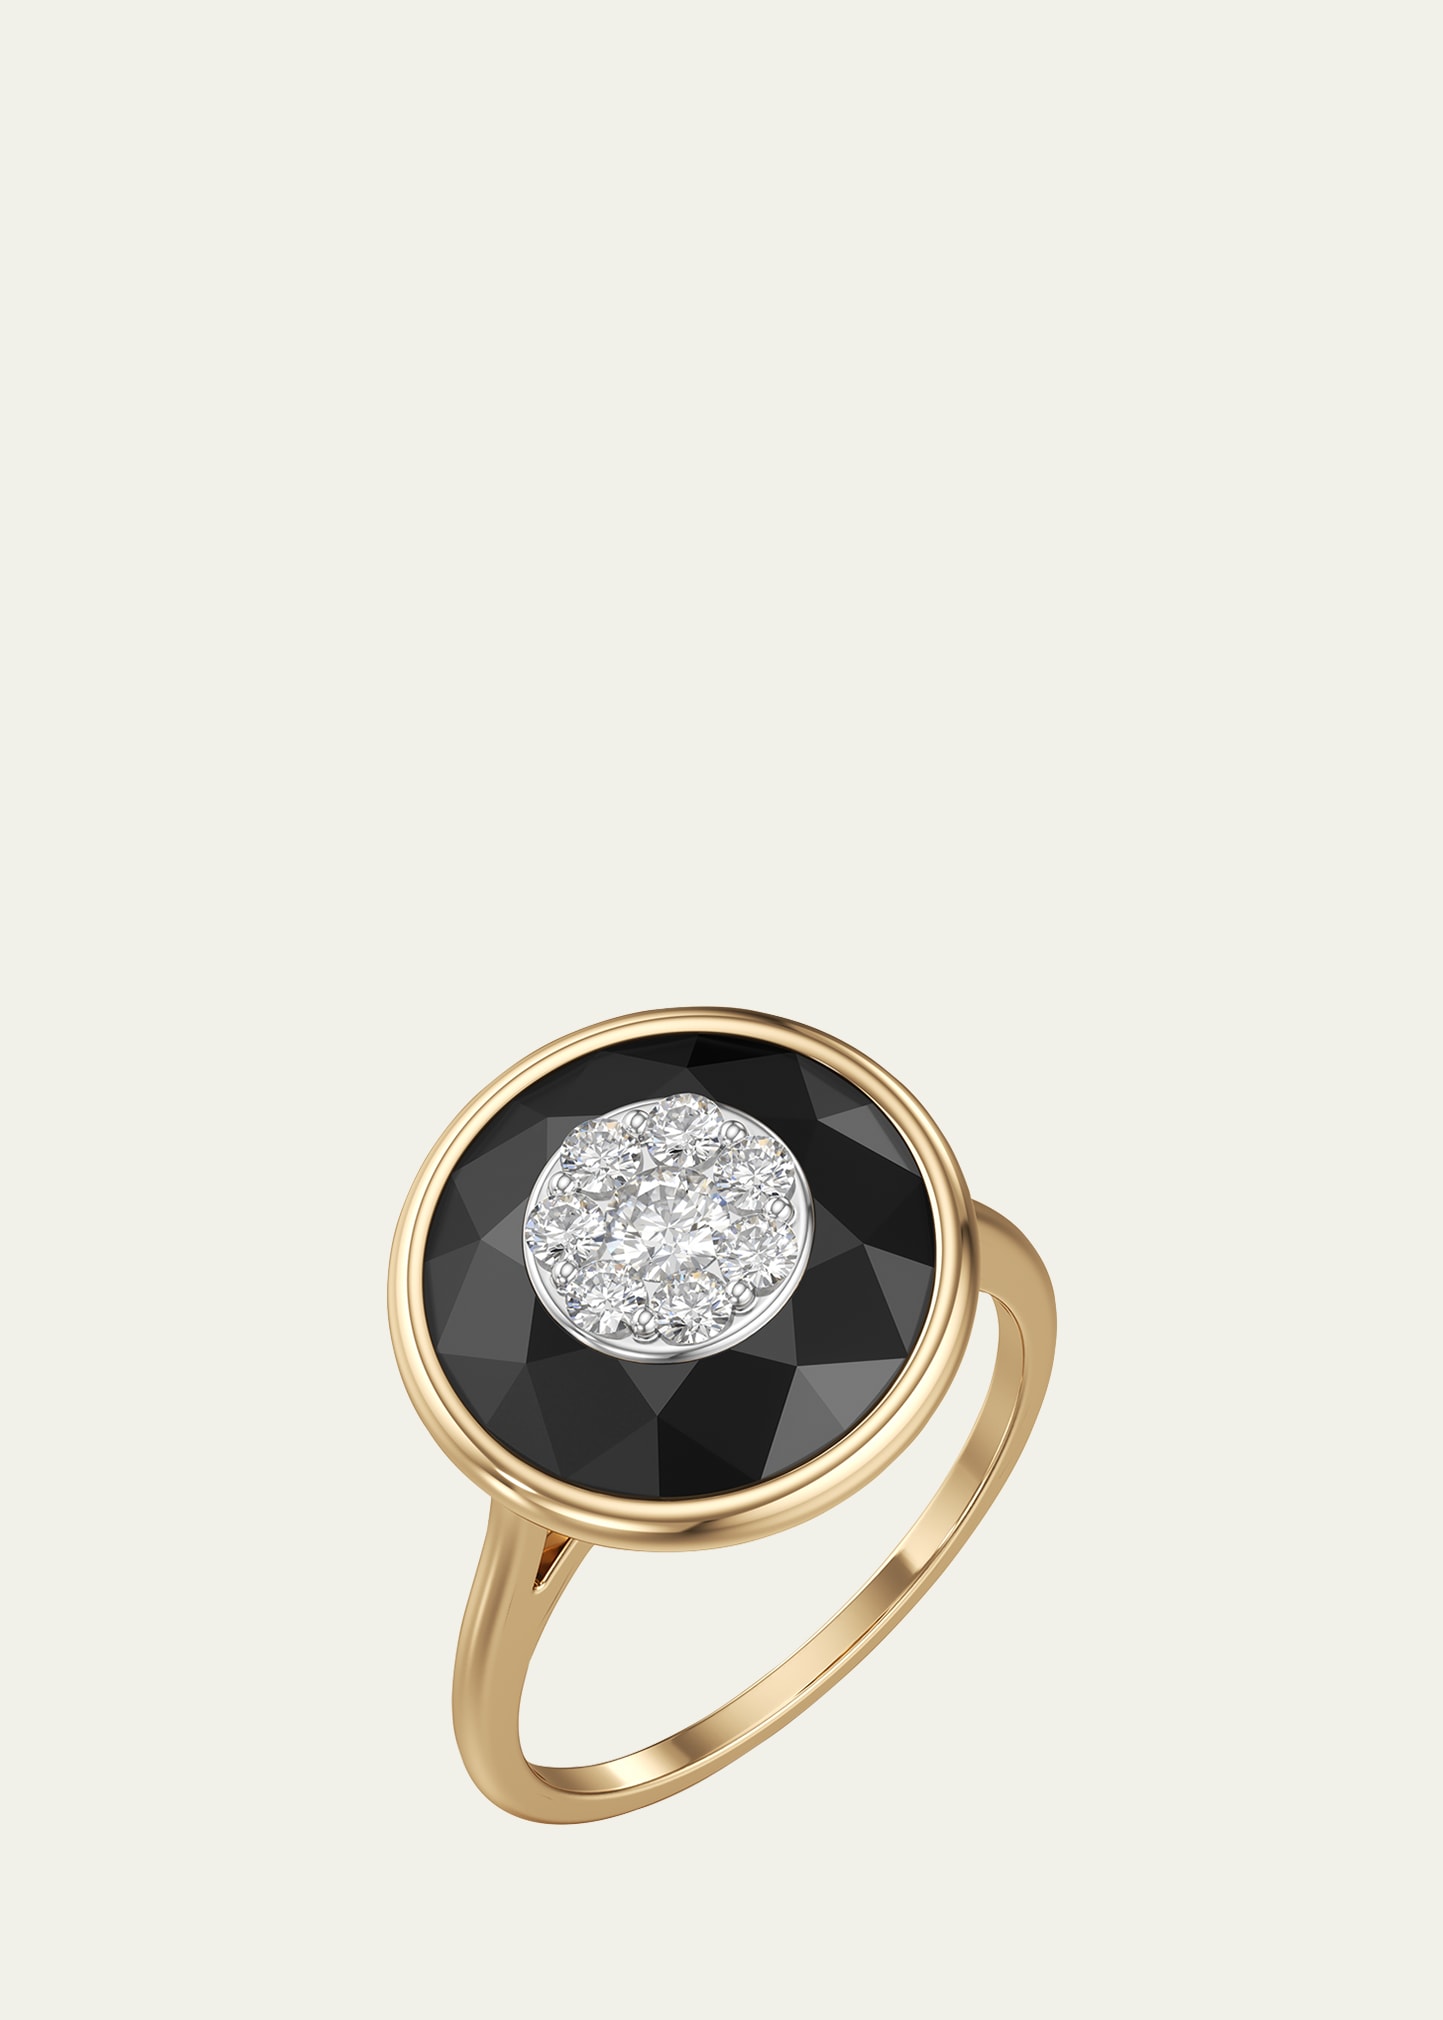 18K Yellow Gold One Collection Bezel Onyx Ring with Diamonds, Size 6.5